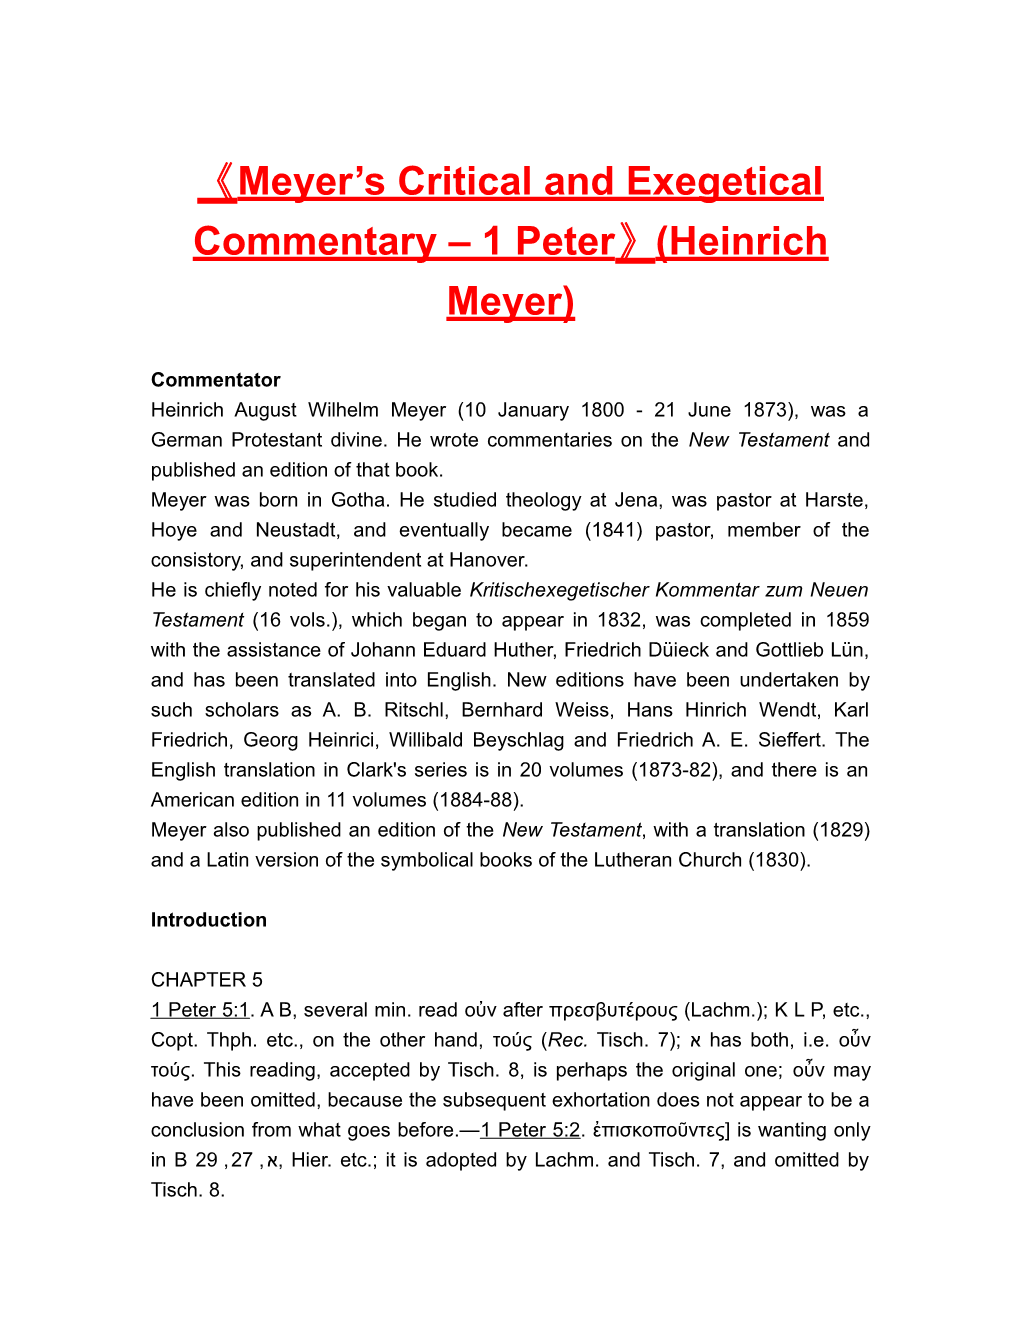 Meyer S Critical and Exegetical Commentary 1 Peter (Heinrichmeyer)